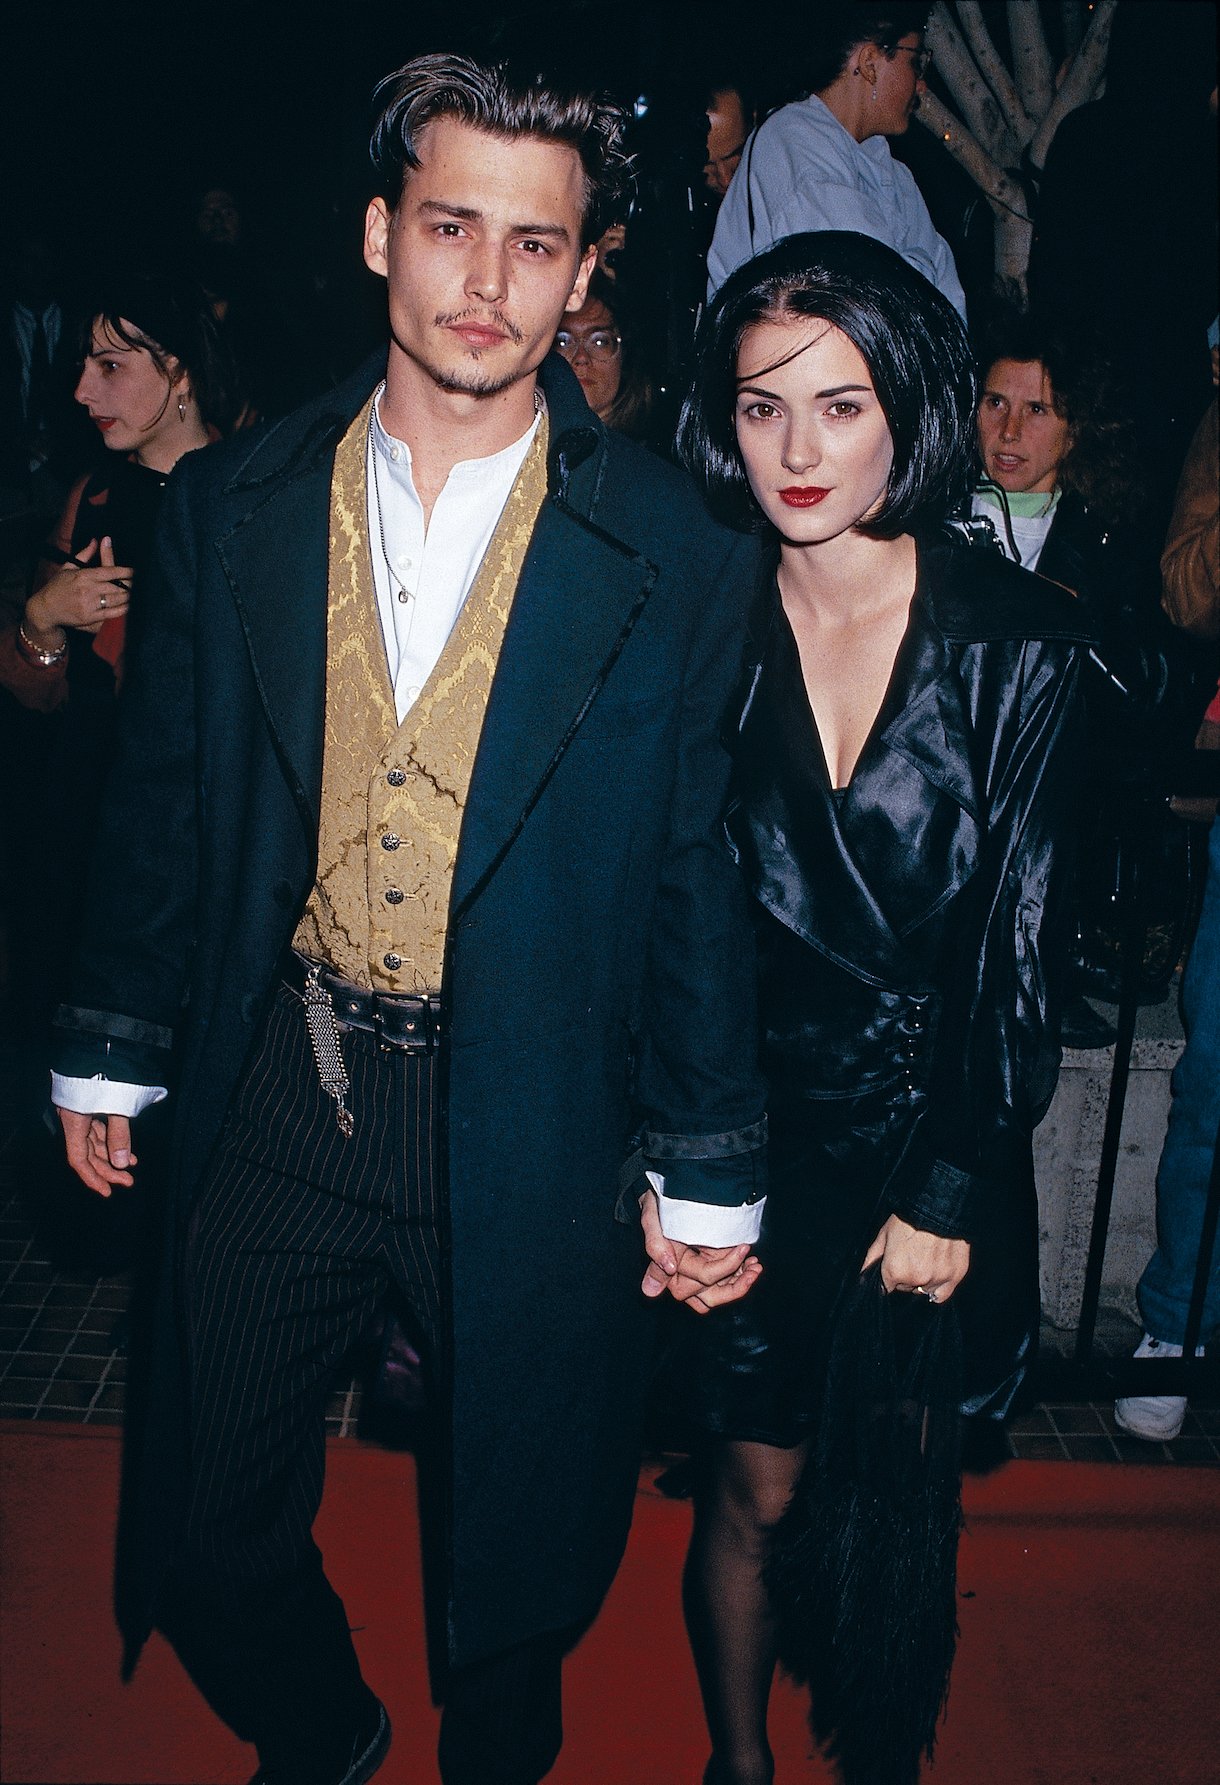 Johnny Depp and actress Winona Ryder arrive at the premiere of 'Edward Scissorhands'